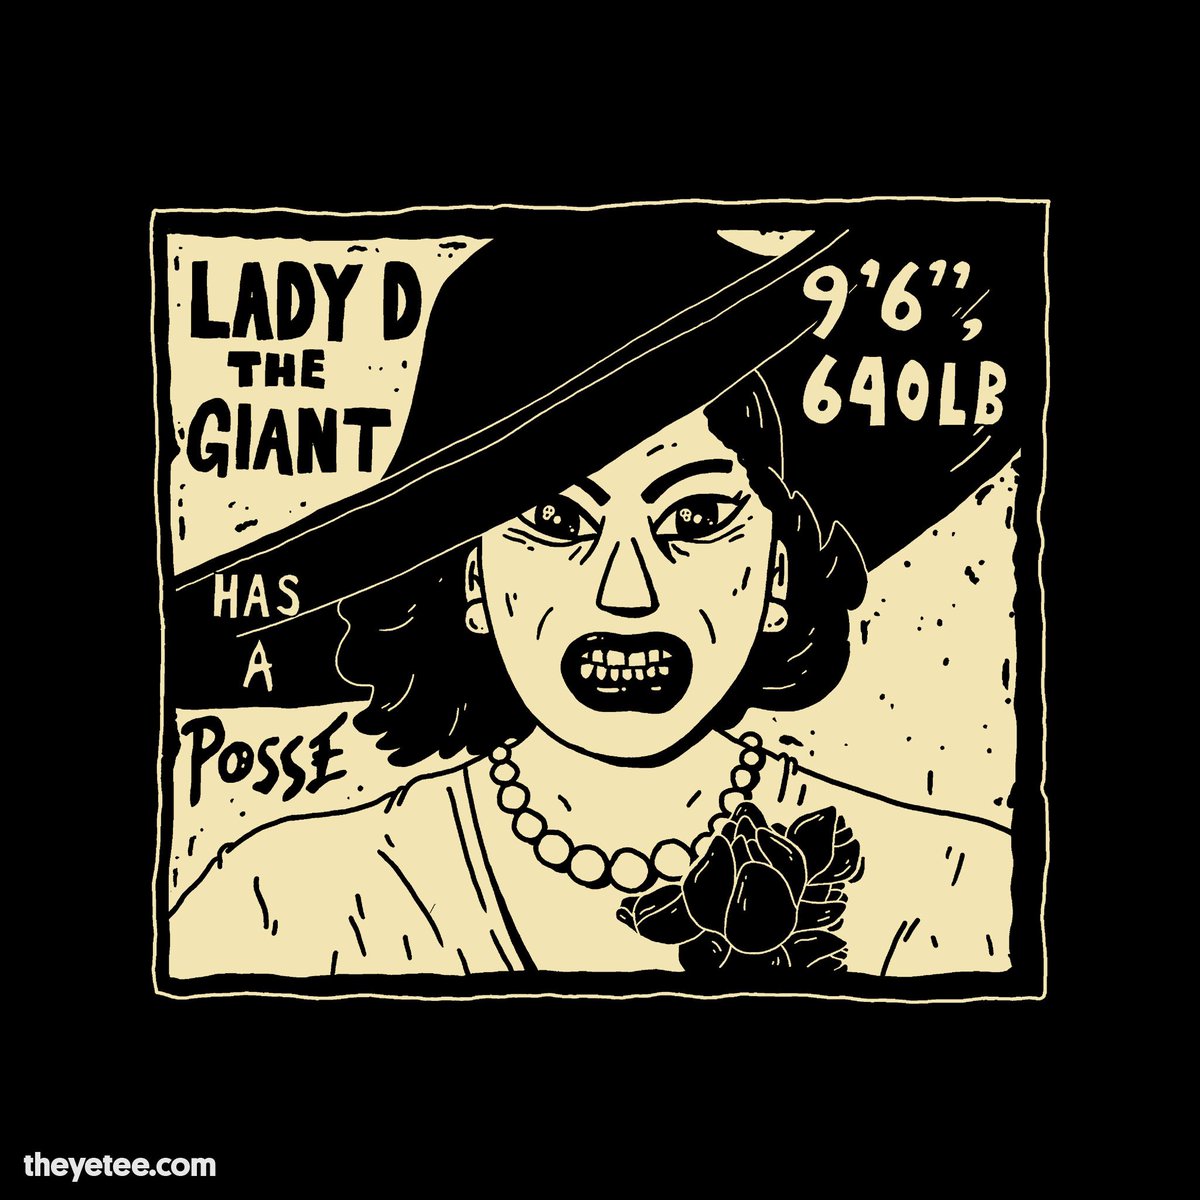 Don't get in her way! The countess always gets what the countess wants. Lady D the Giant Has a Posse printed with Super Soft ink designed by @Cooooouk  https://t.co/ZD8ueXQ3ta 